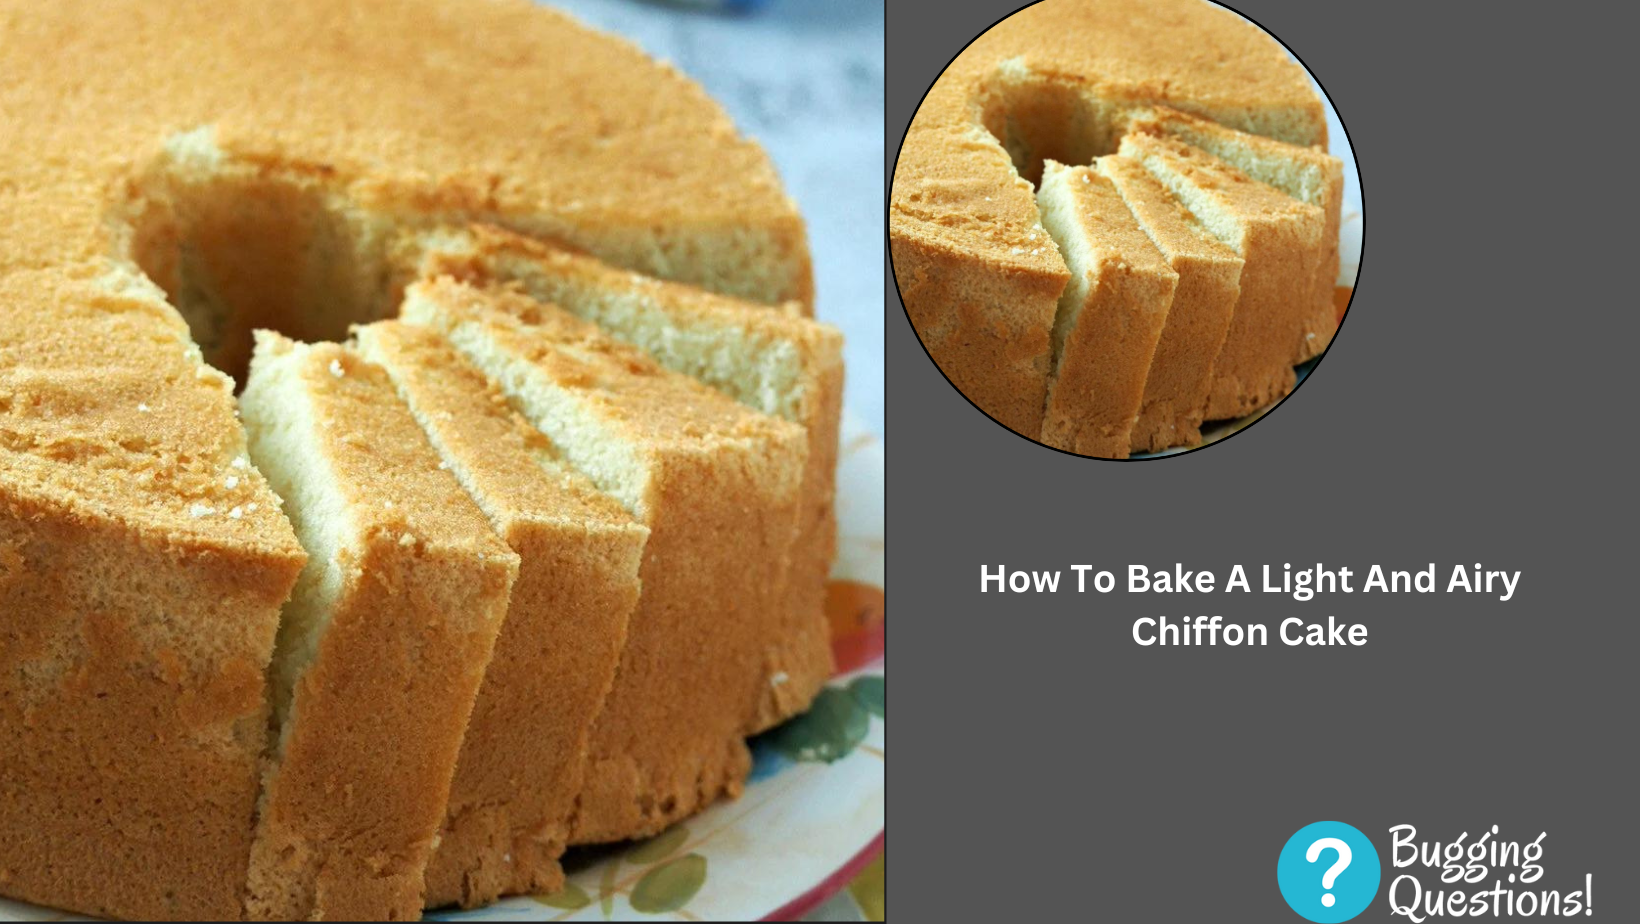 How To Bake A Light And Airy Chiffon Cake